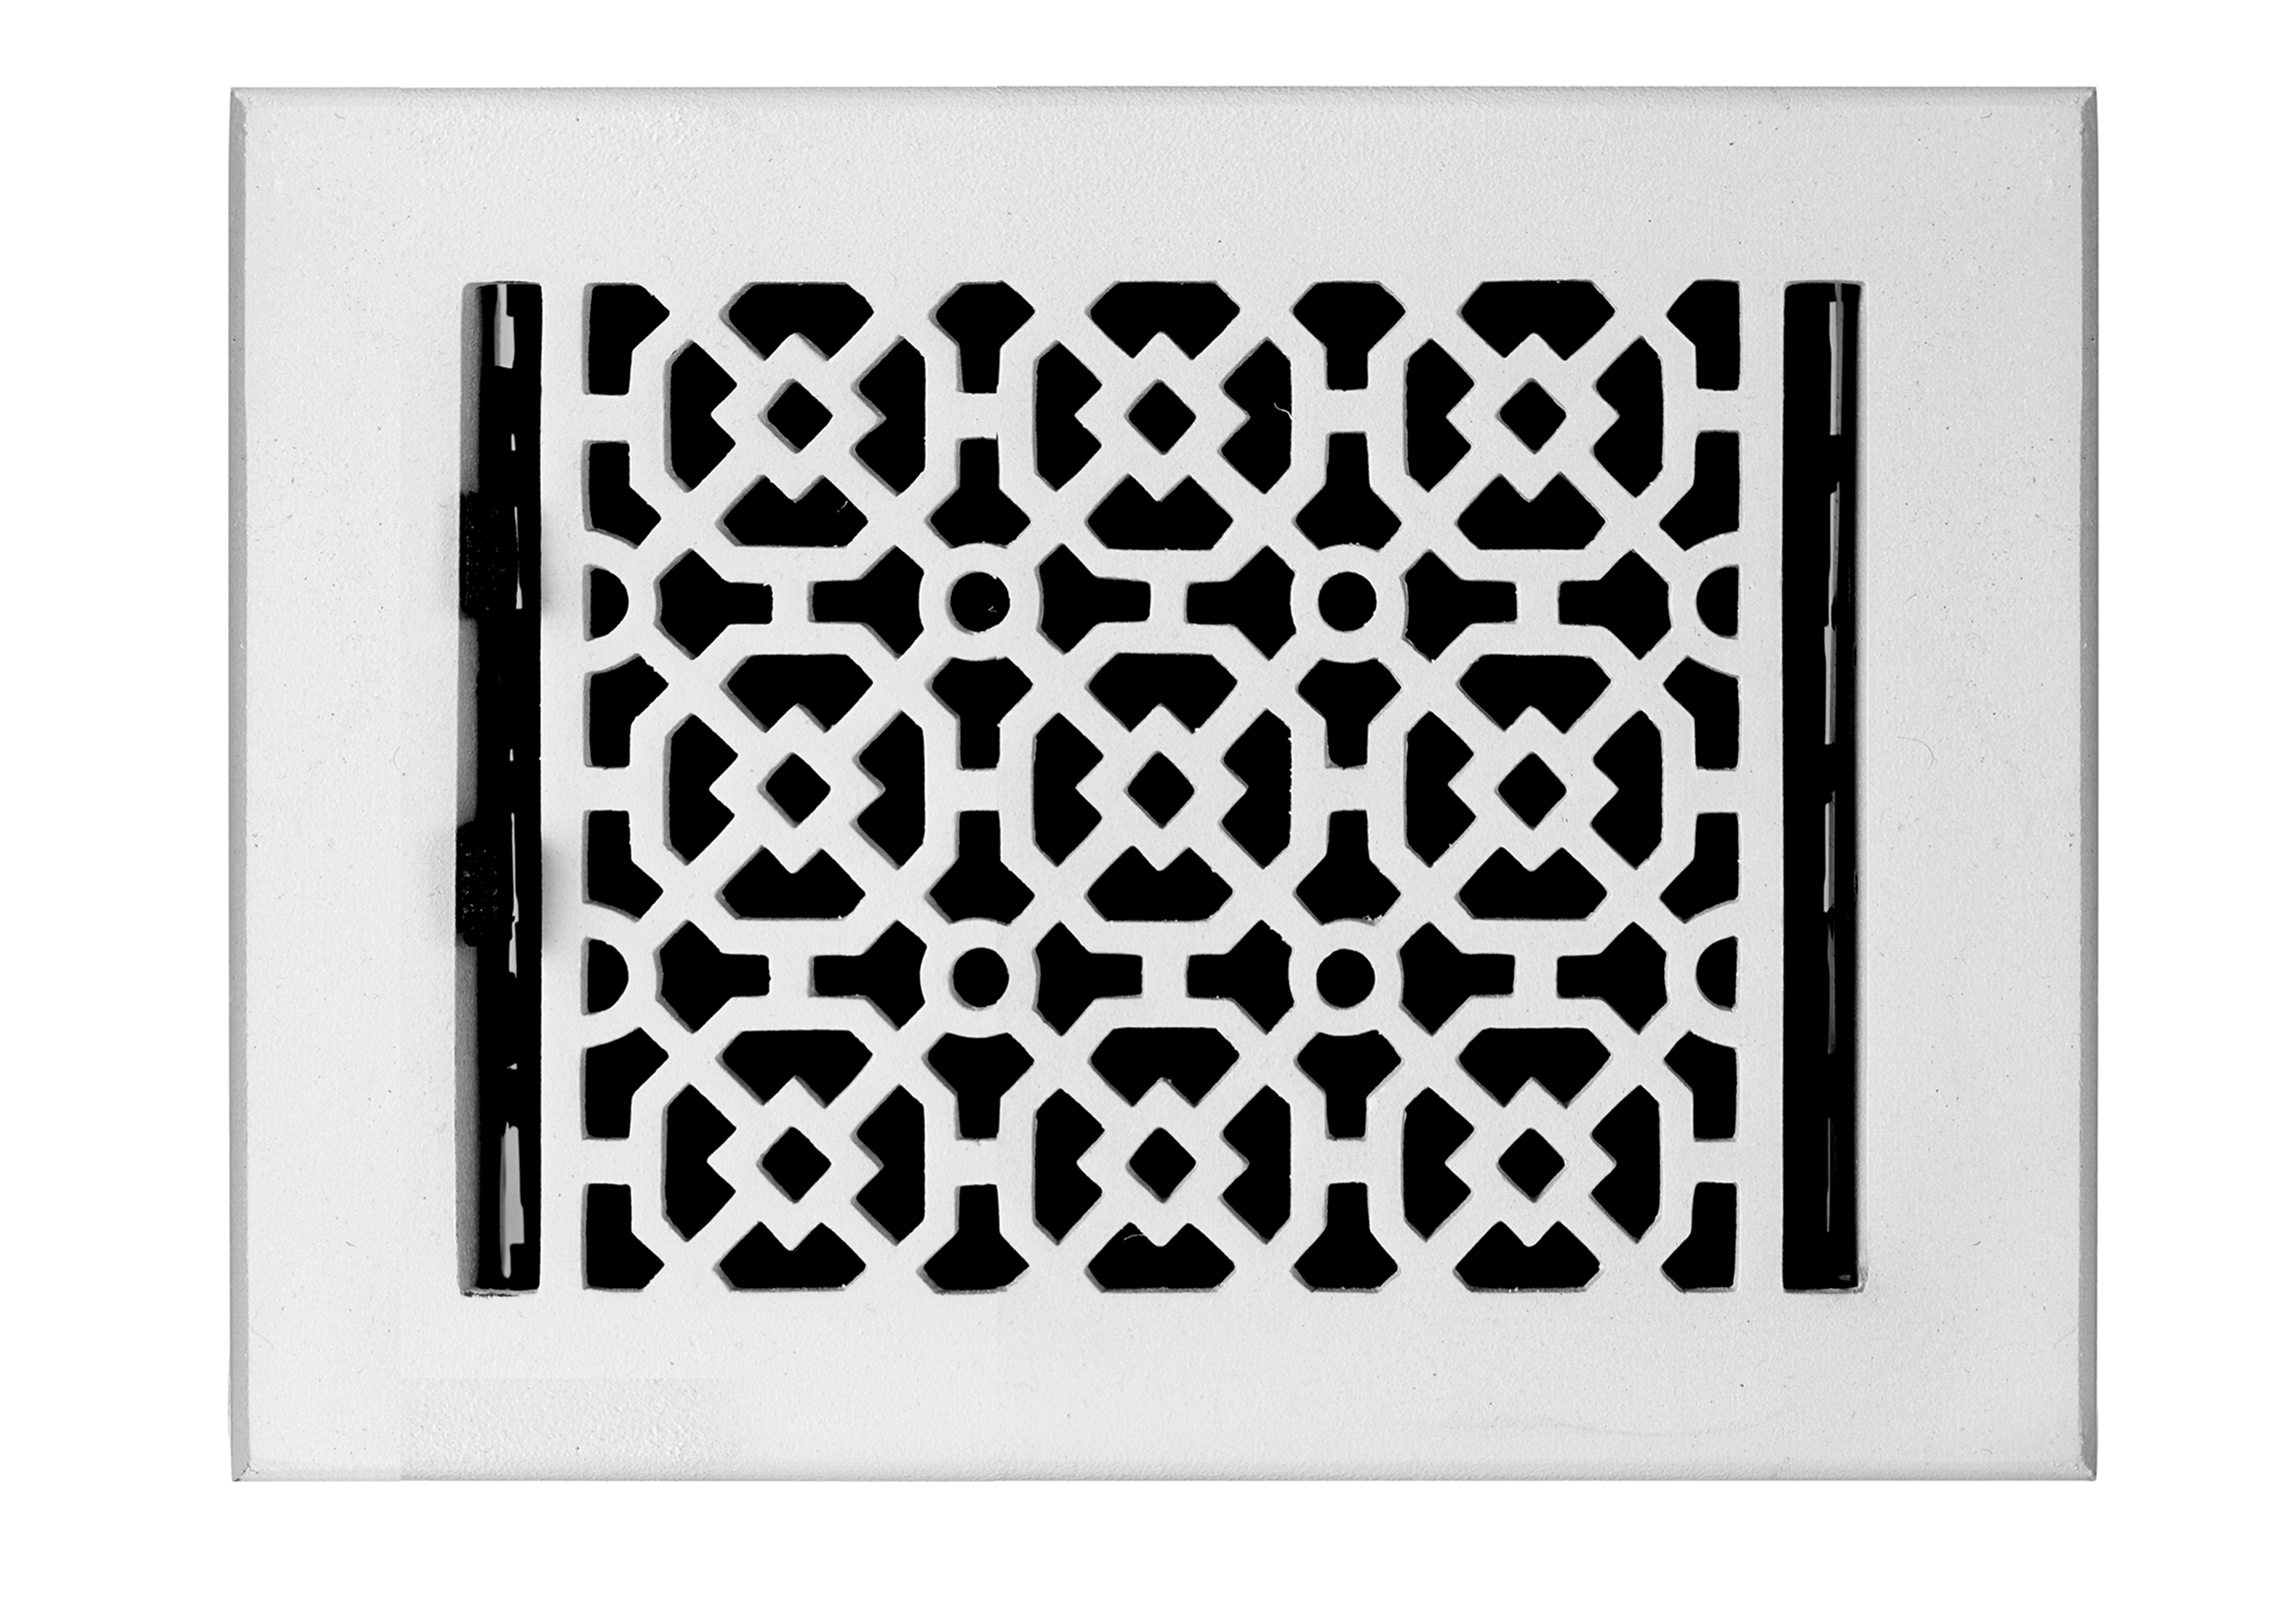 Achtek Air Supply Vent 6"x 8" Duct Opening (Overall 7-1/2"x 9-3/4") Solid Cast Aluminium Register Cover | Powder Coated